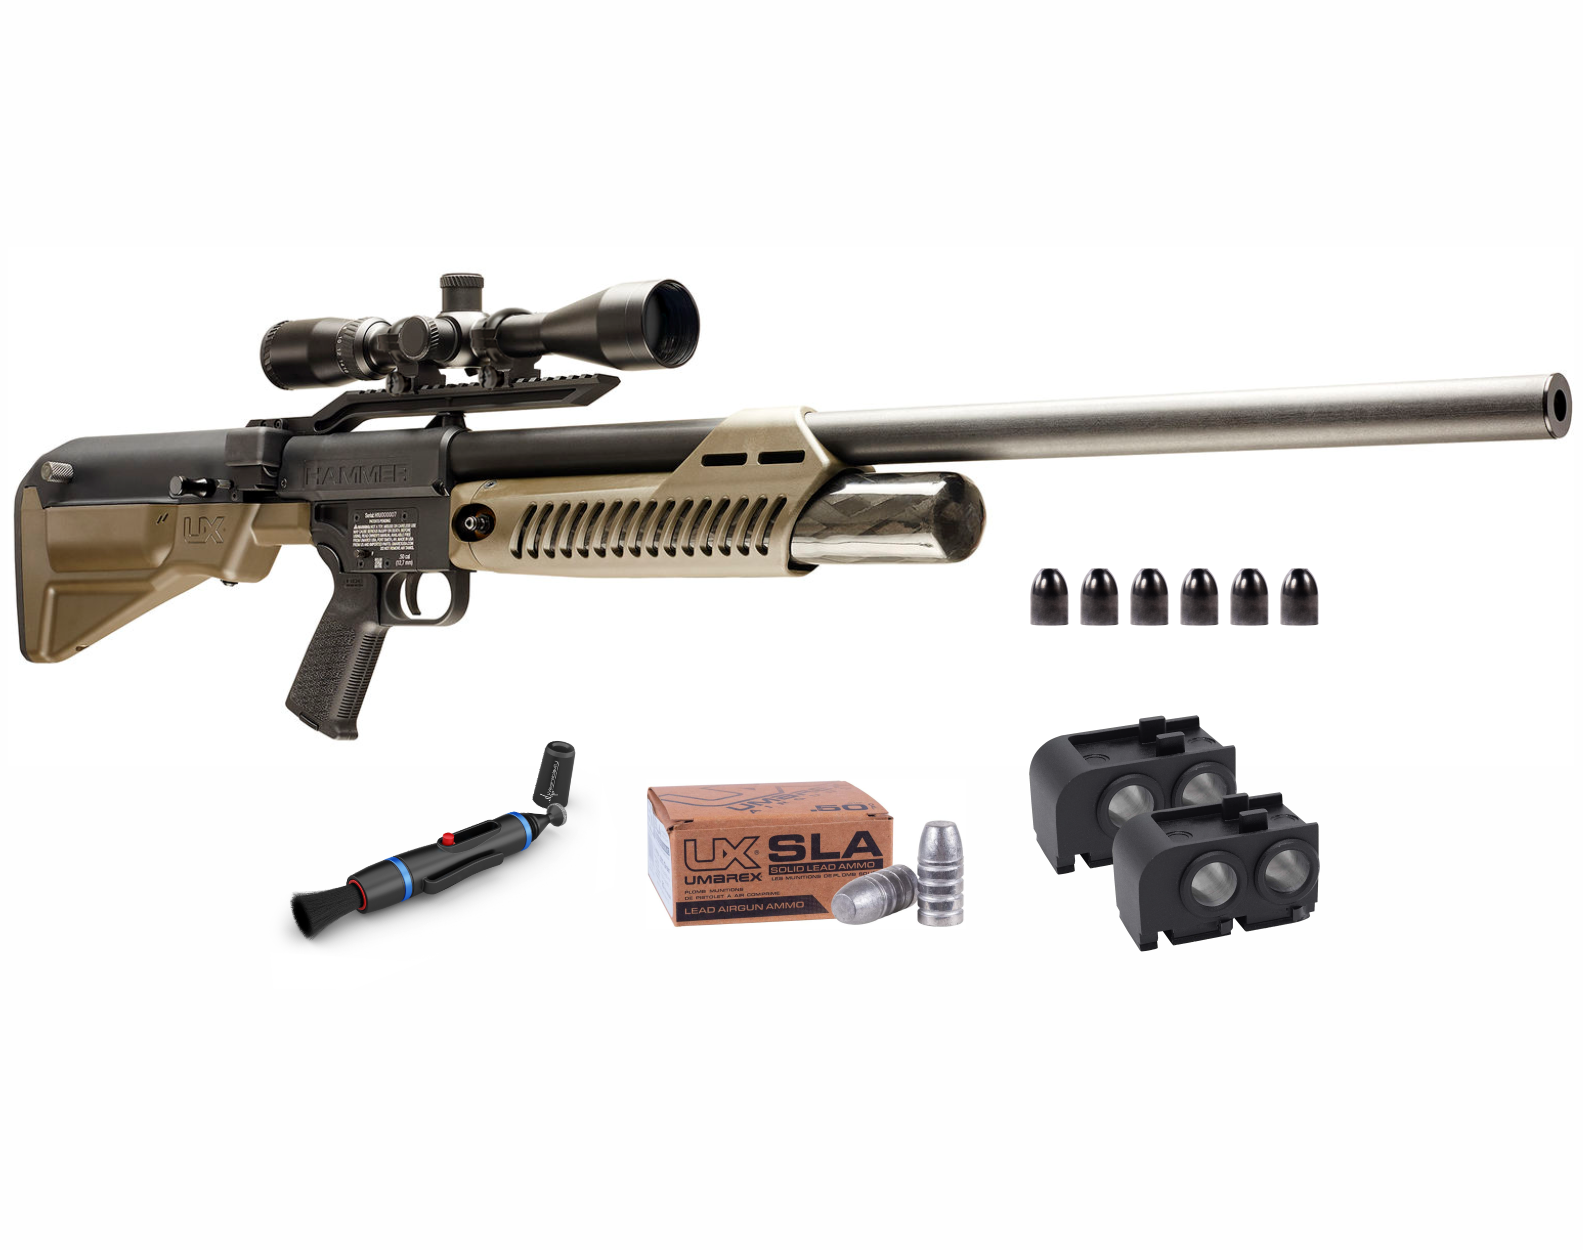 Umarex .50 Caliber PCP Pellet Hunting Gun Rifle with Bundle – Sports and Gadgets